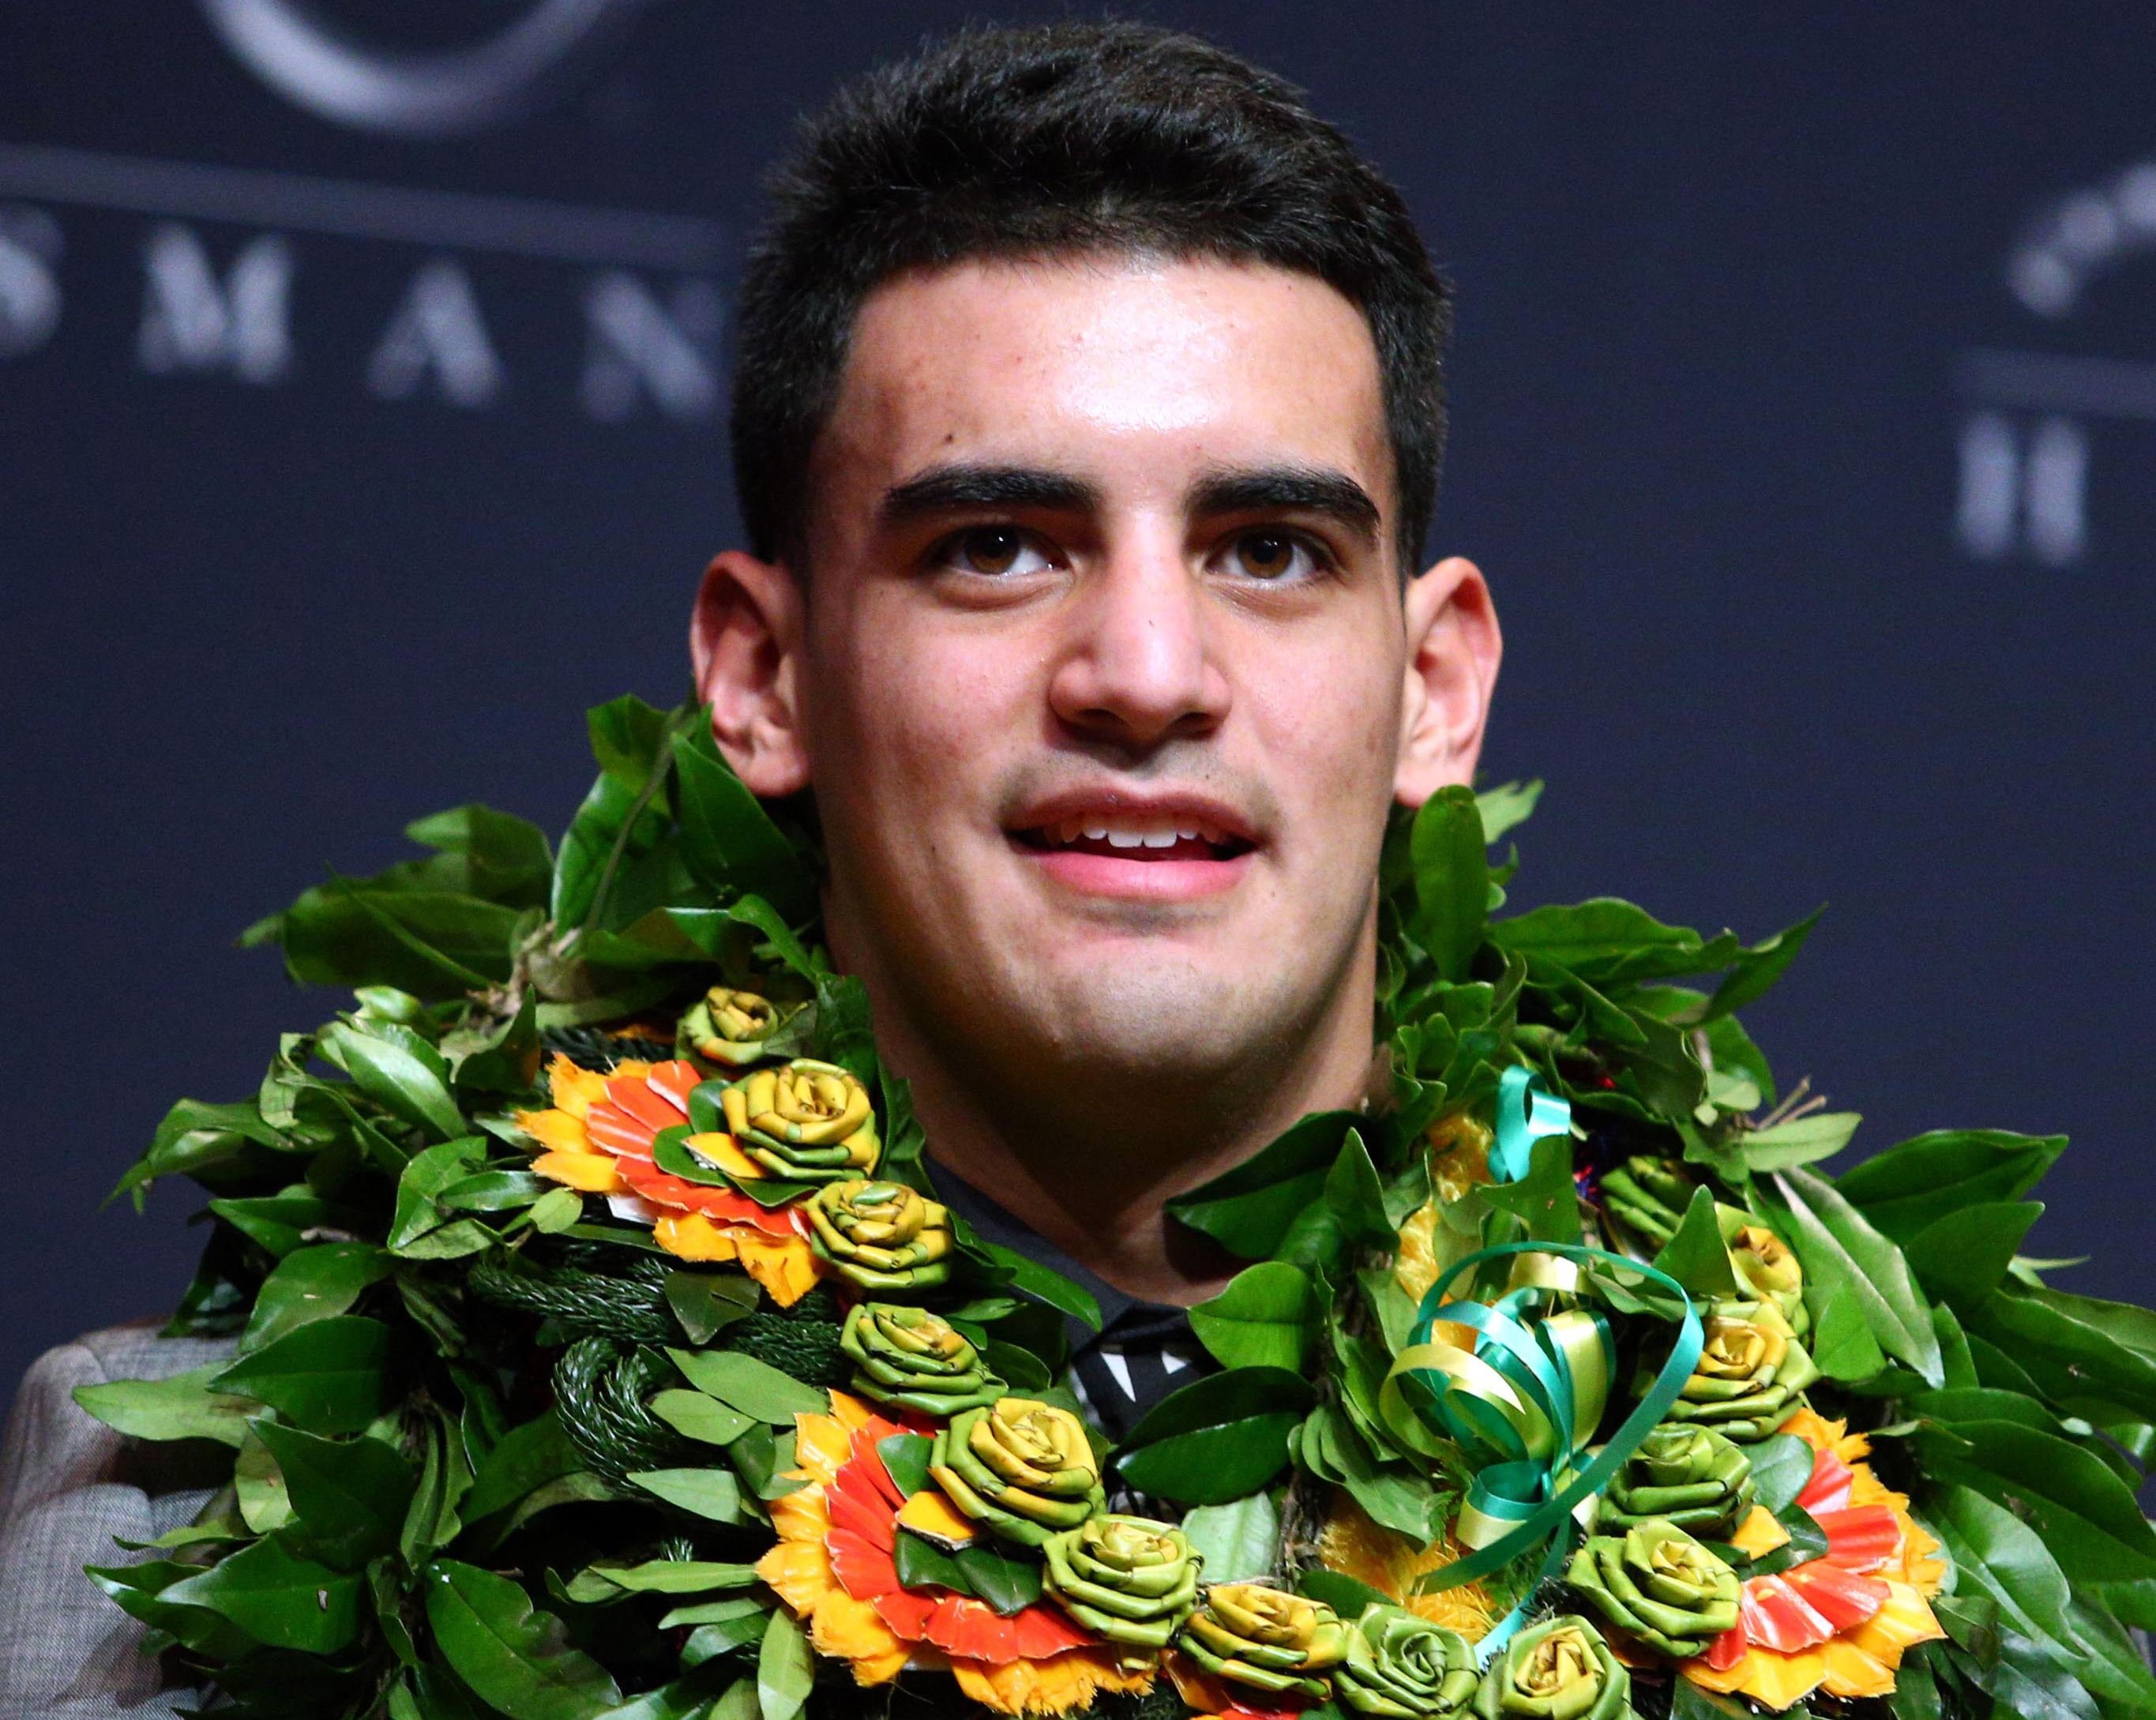 Oregon Ducks quarterback Marcus Mariota answers questions during a press conference after winning the Heisman Trophy in New York on Dec. 13, 2014. (Brad Penner—USA Today Sports/Reuters)